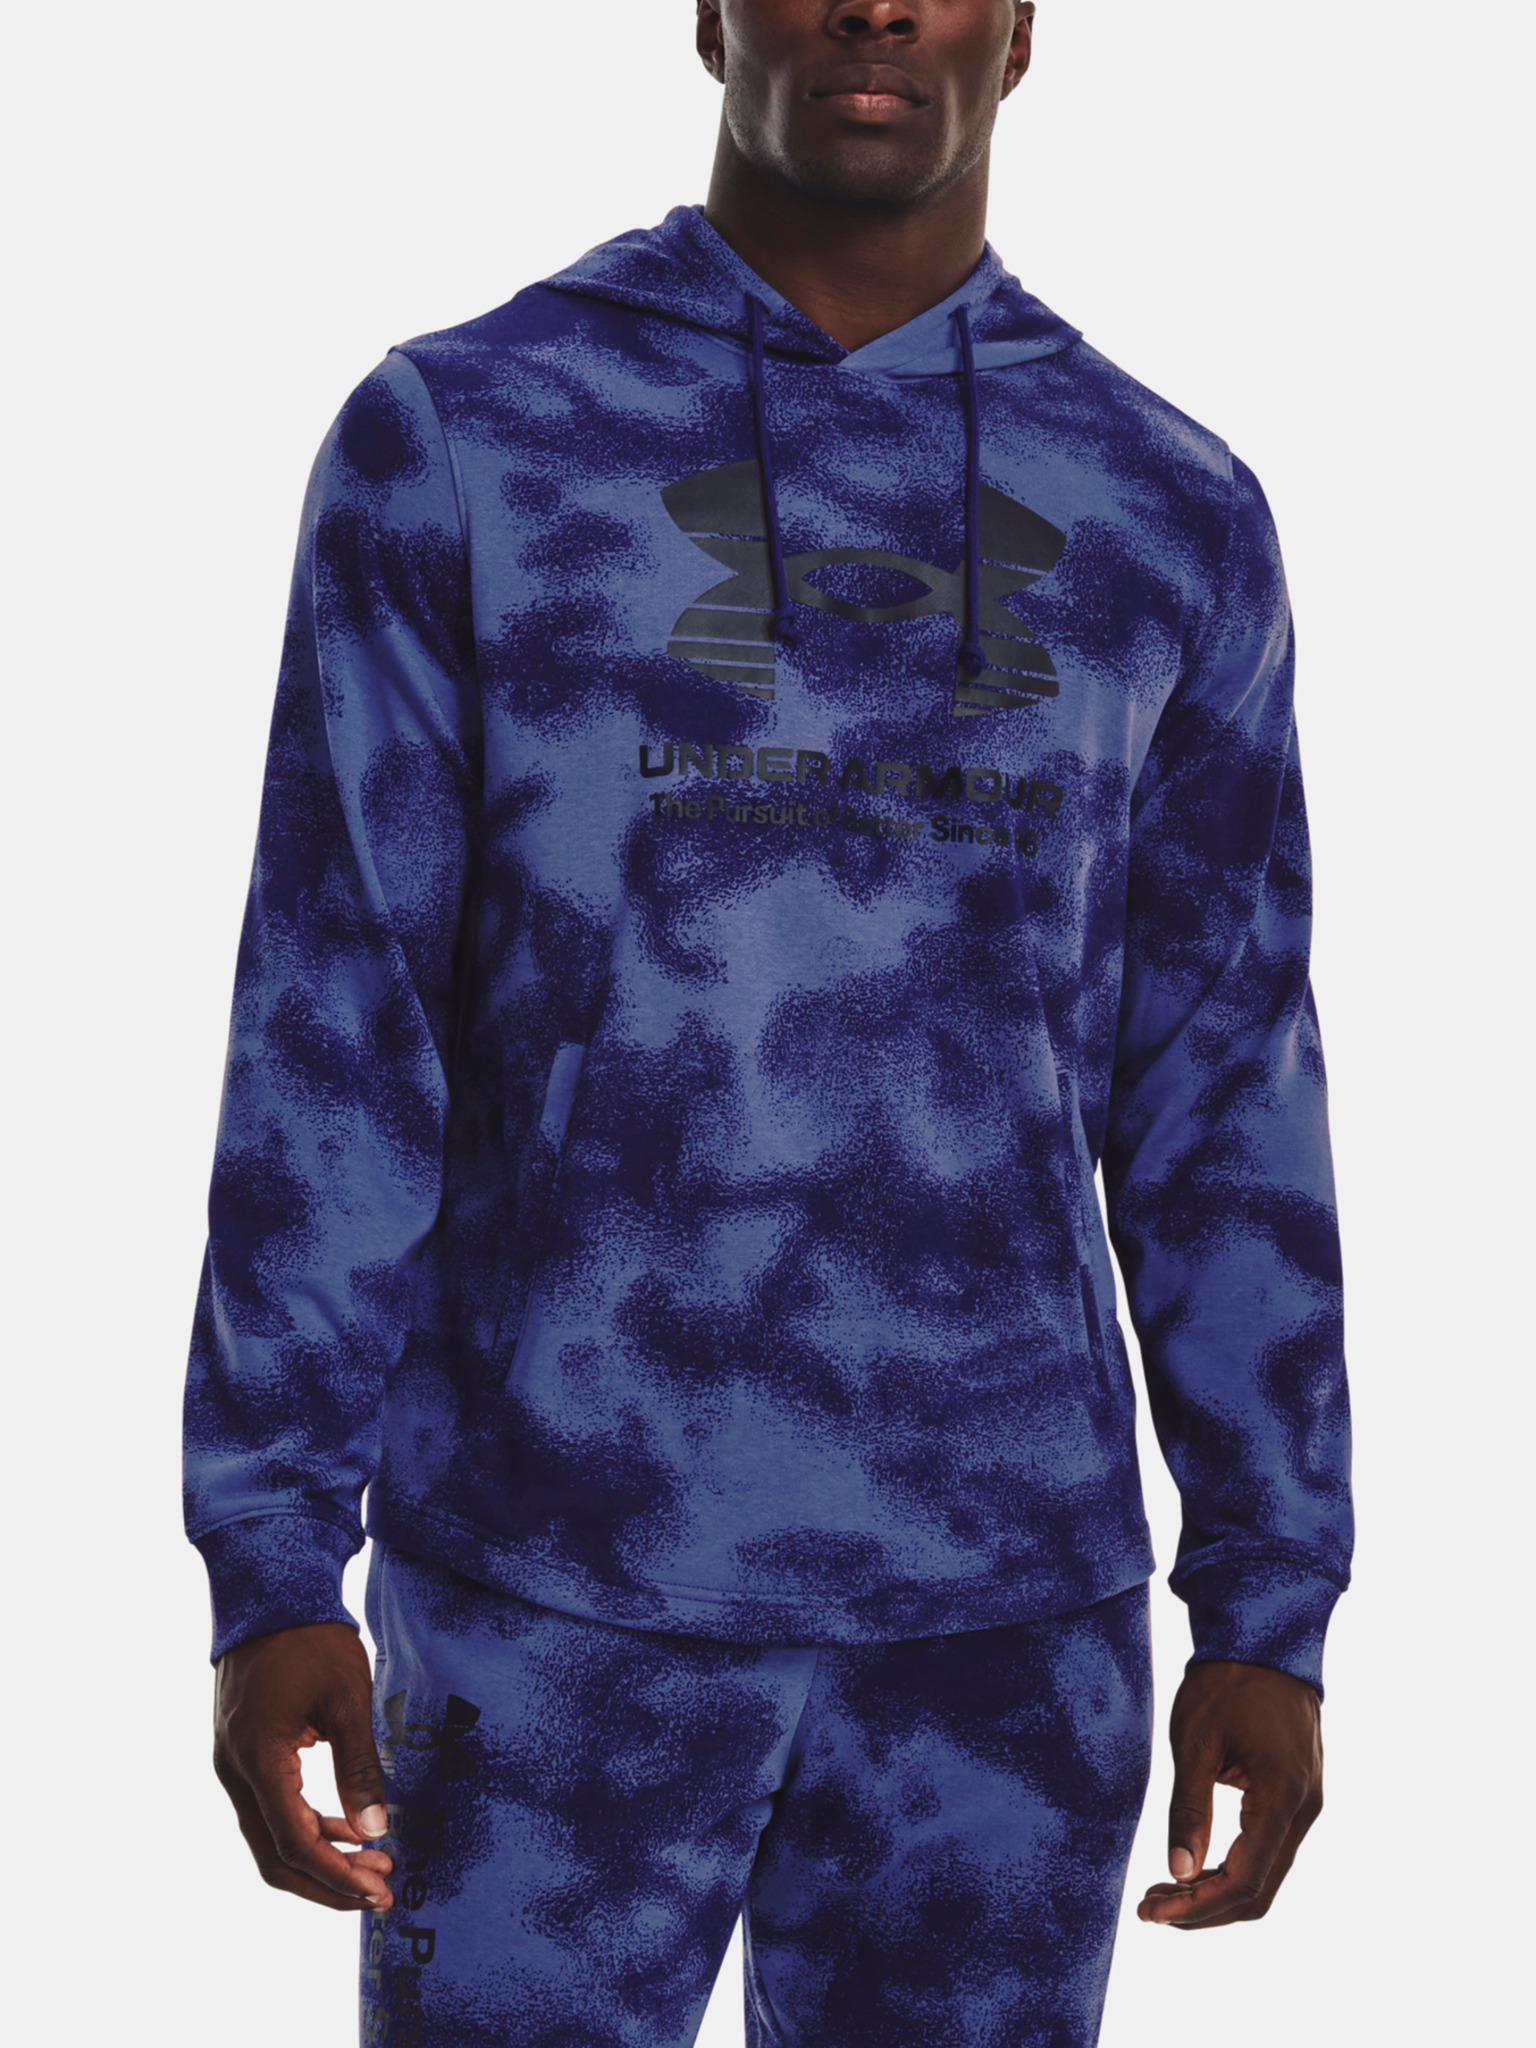 Under Armour - Rival Terry Novelty HD Sweatshirt